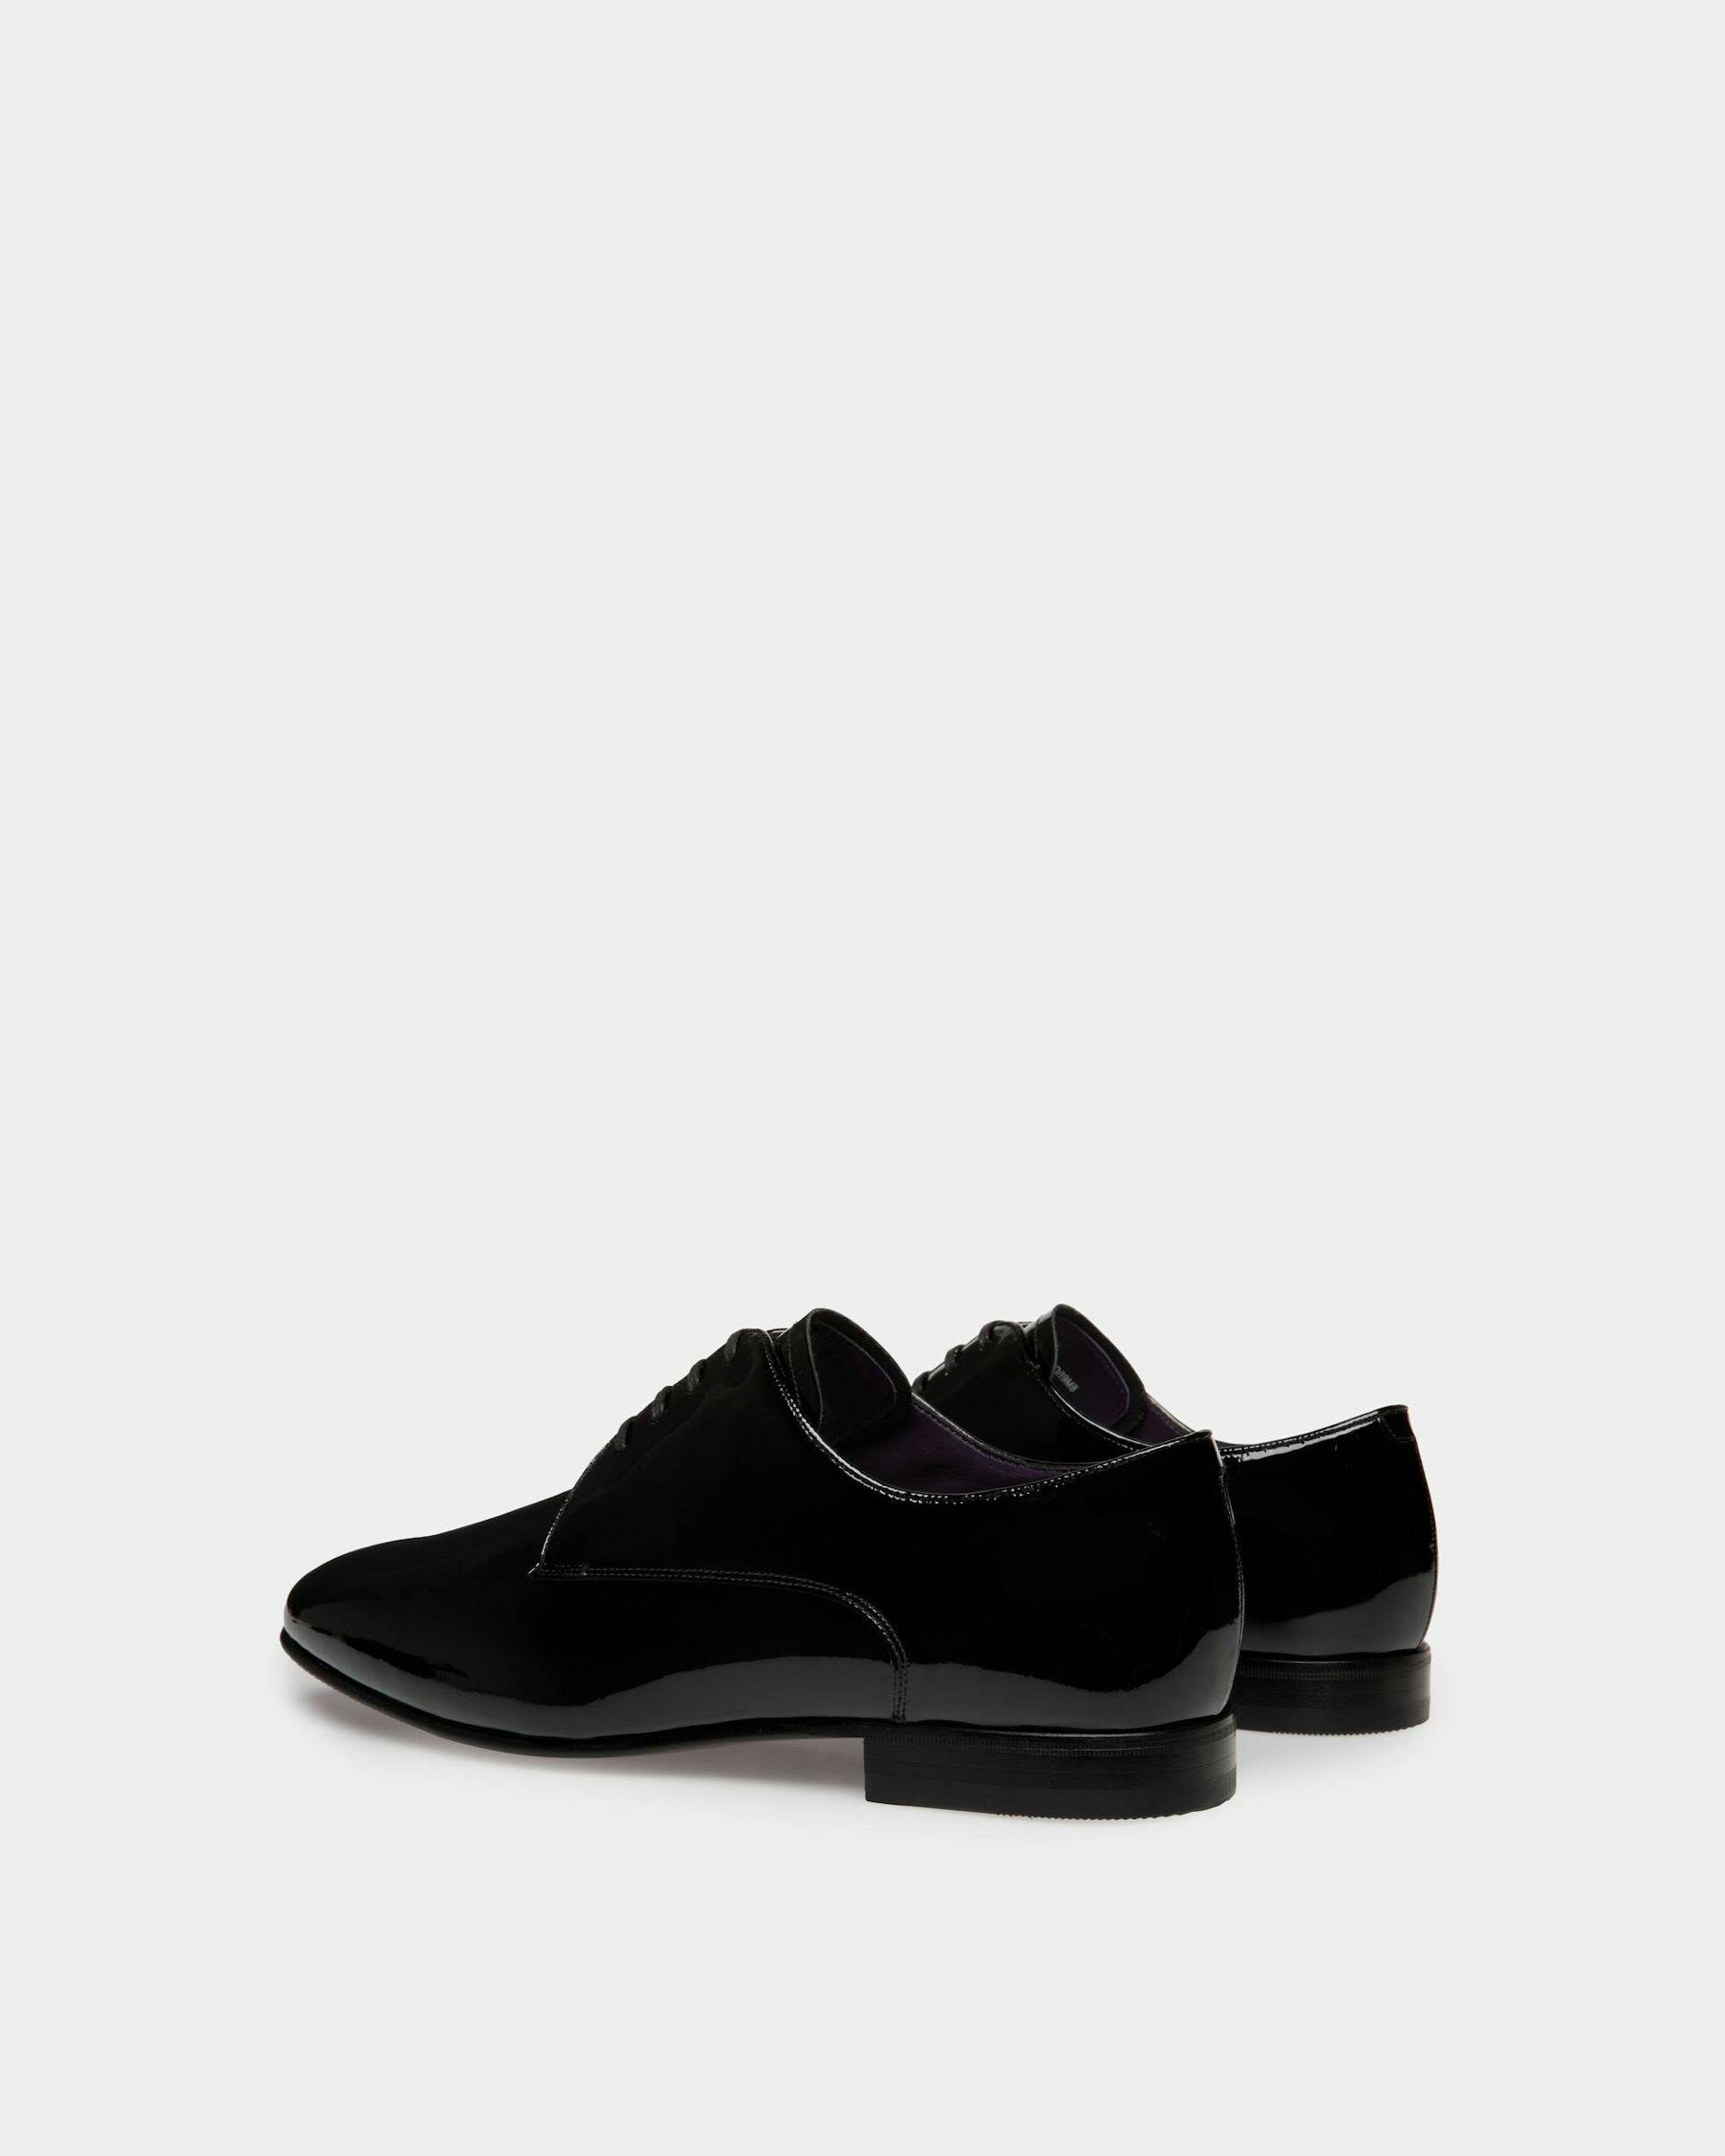 Suisse Derby in Black Patent Leather - Men's - Bally - 03